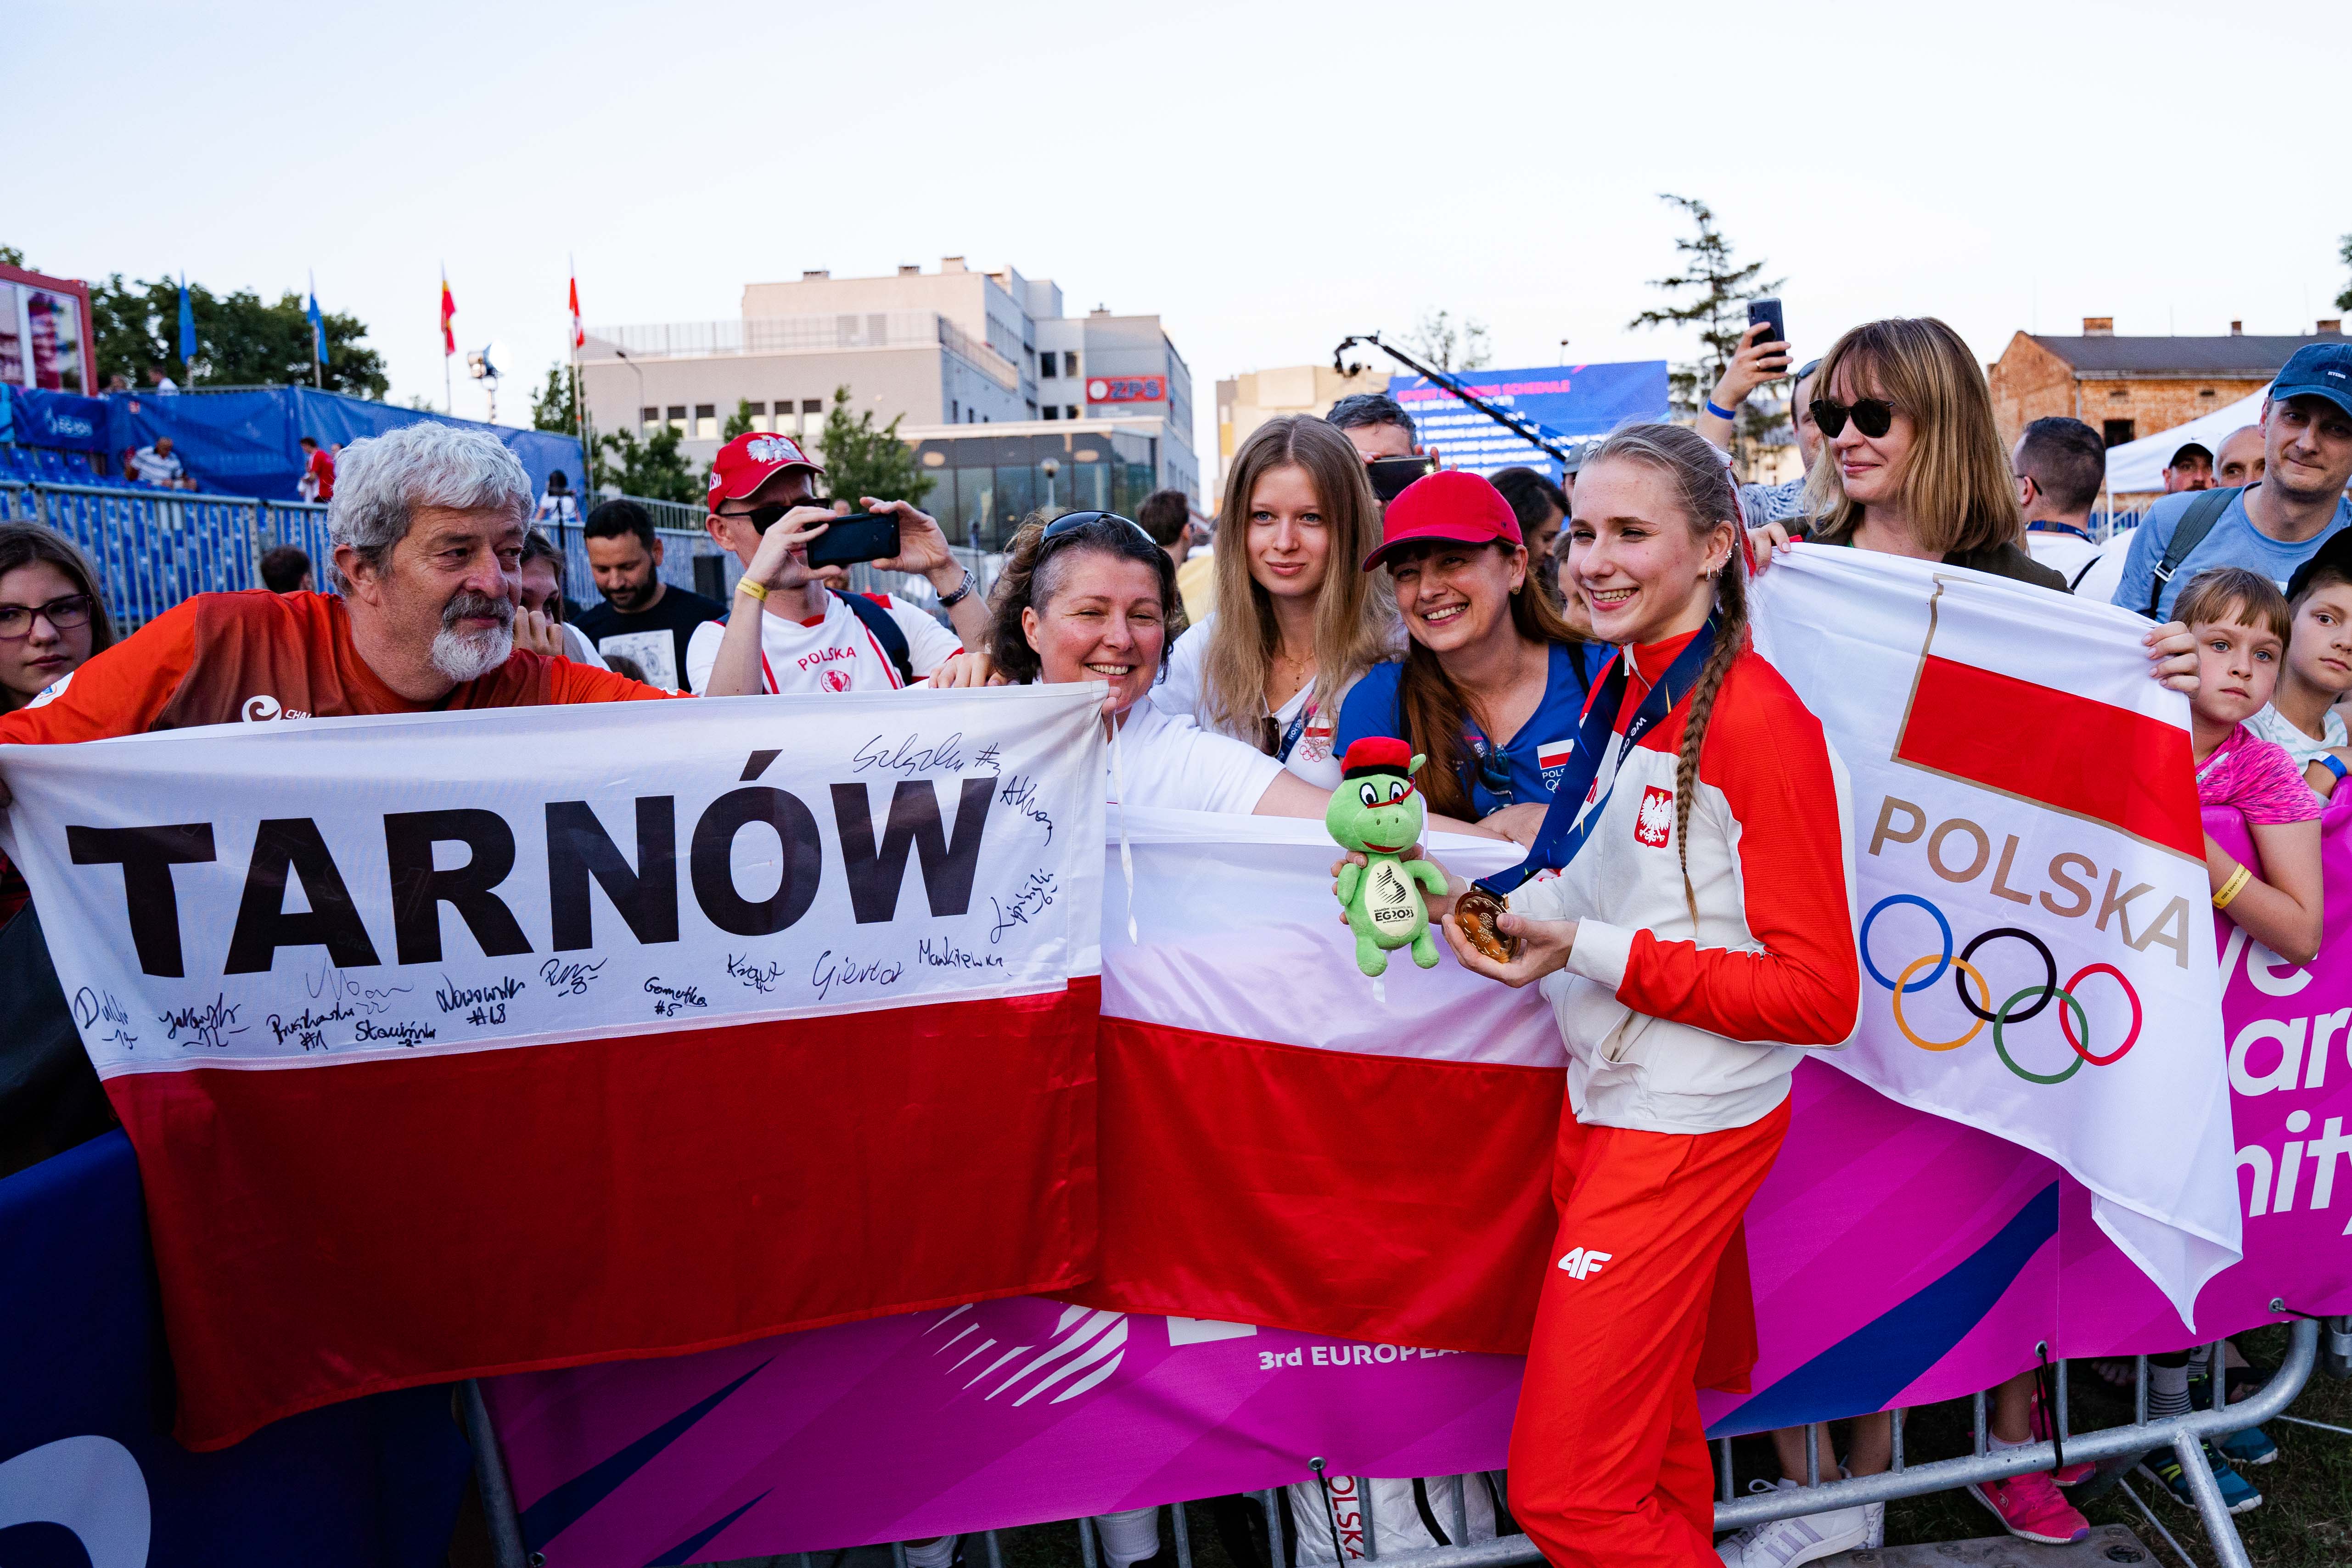 Tarnow-native Natalia Kalucka sets new personal best on her way to the European Games gold medal